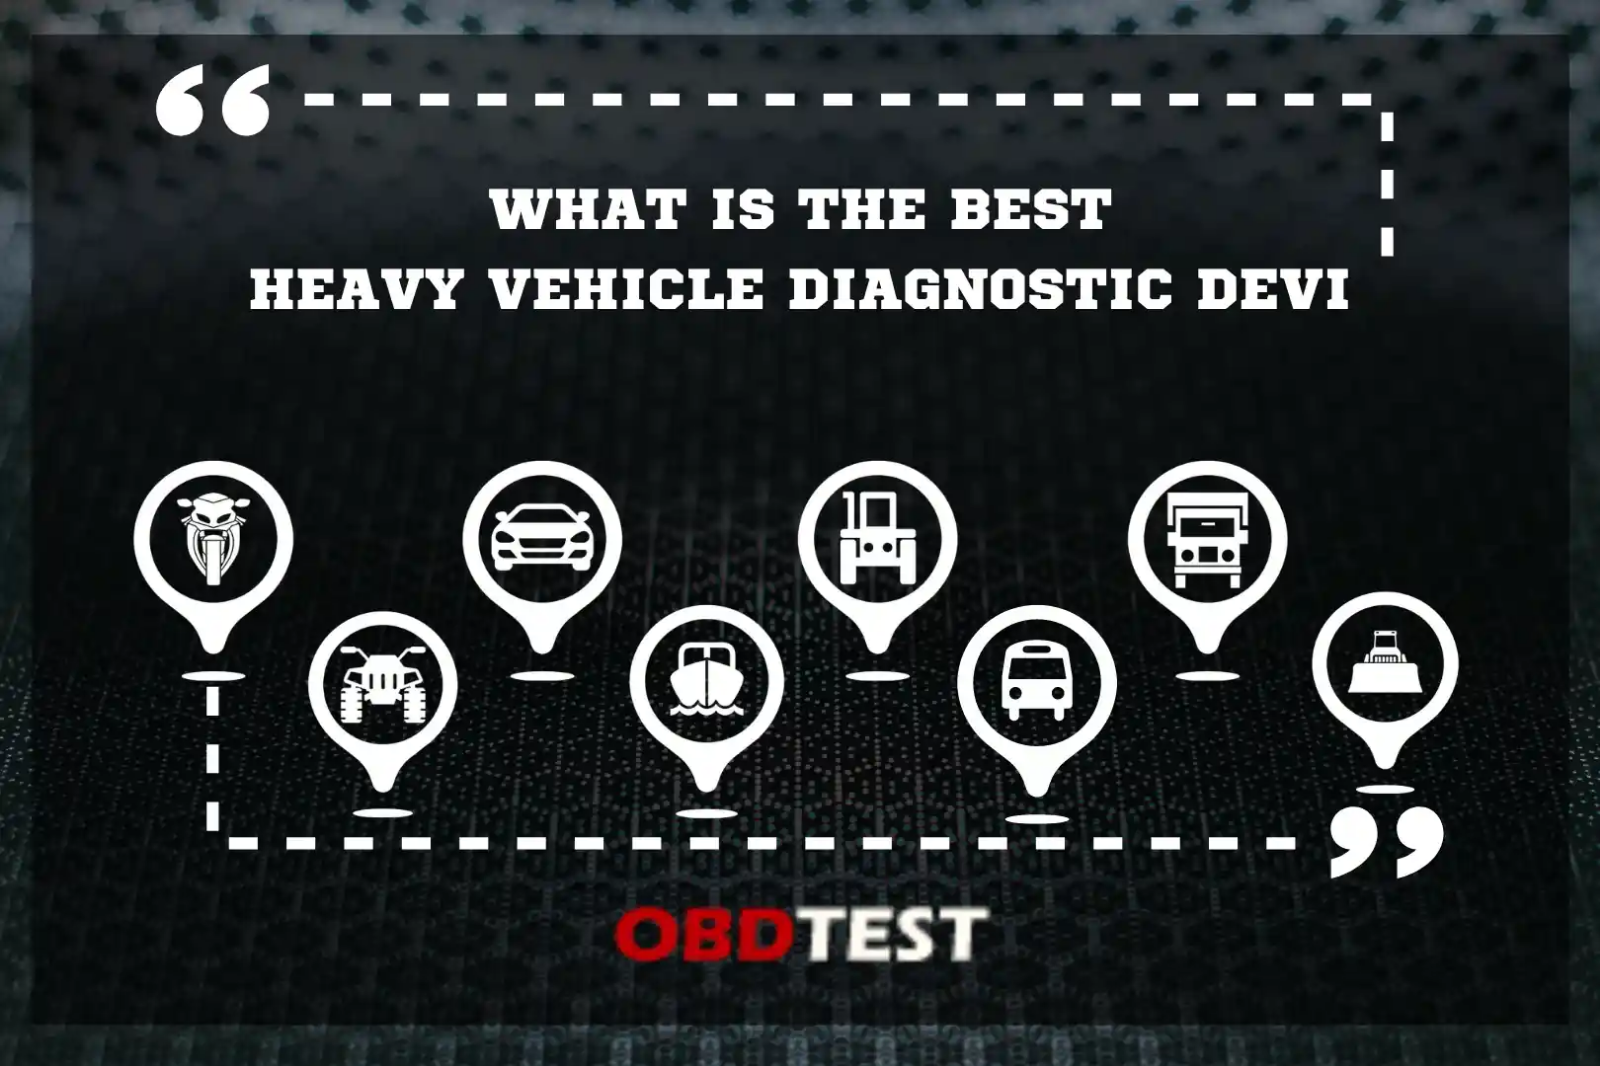 What is the best heavy vehicle diagnostic device?